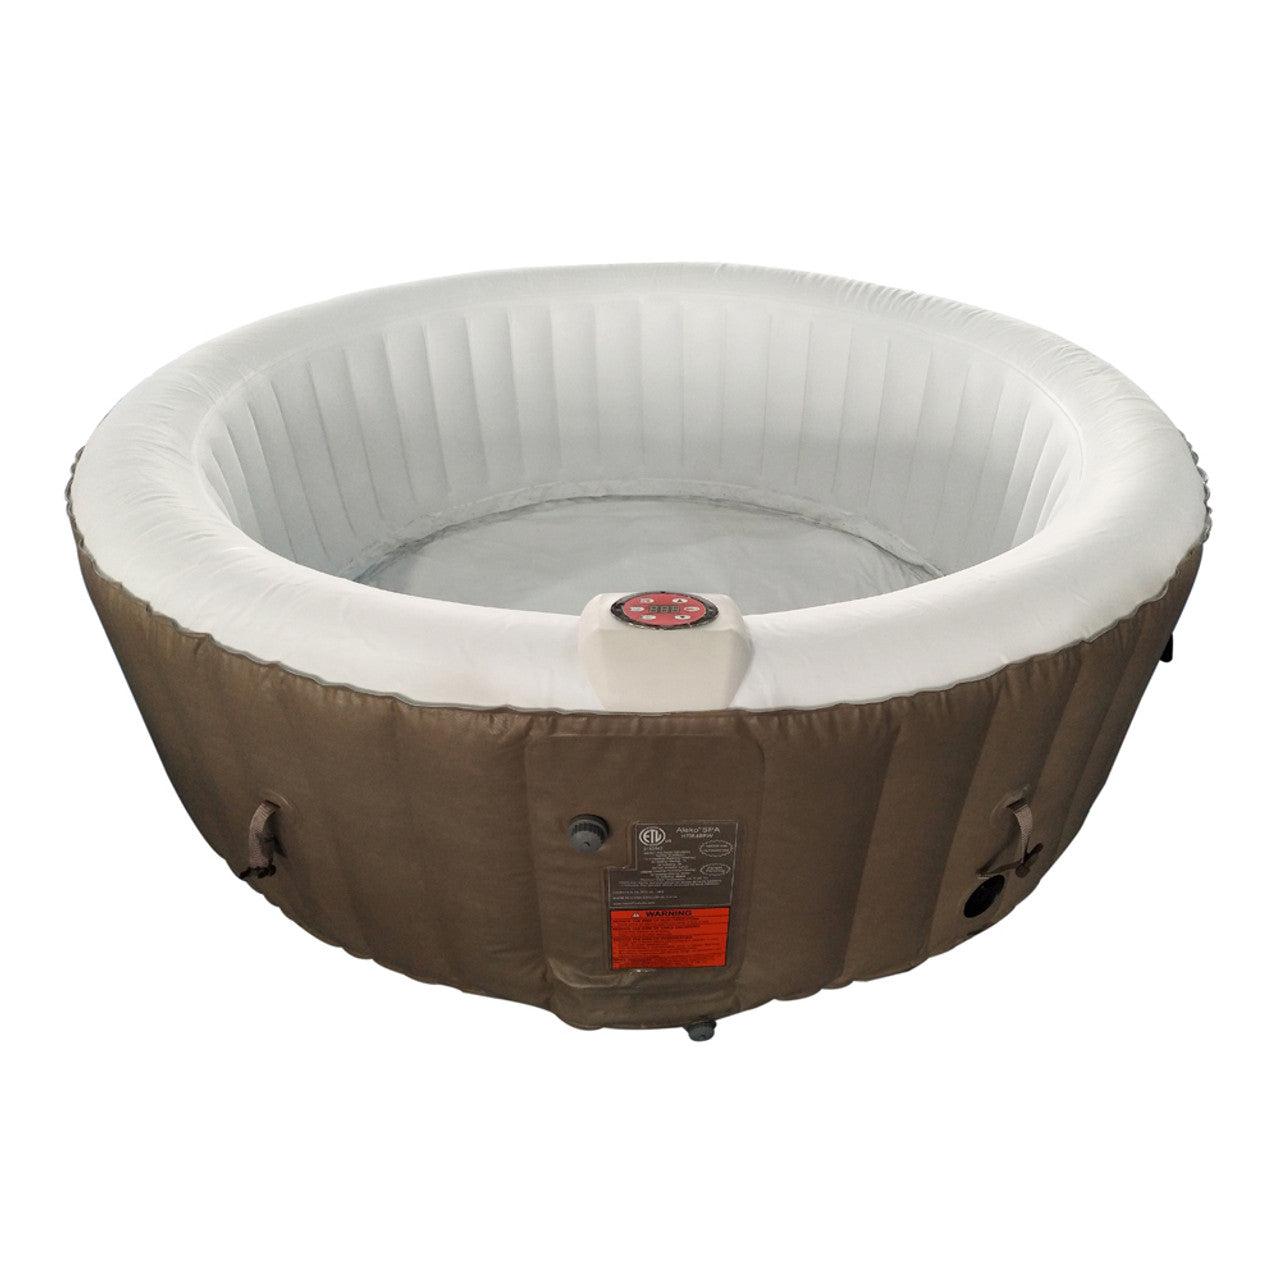 ALEKO 4 Person Brown and White 210 Gallon Round Inflatable Jetted Hot Tub with Cover-Hot Tub-Purely Relaxation